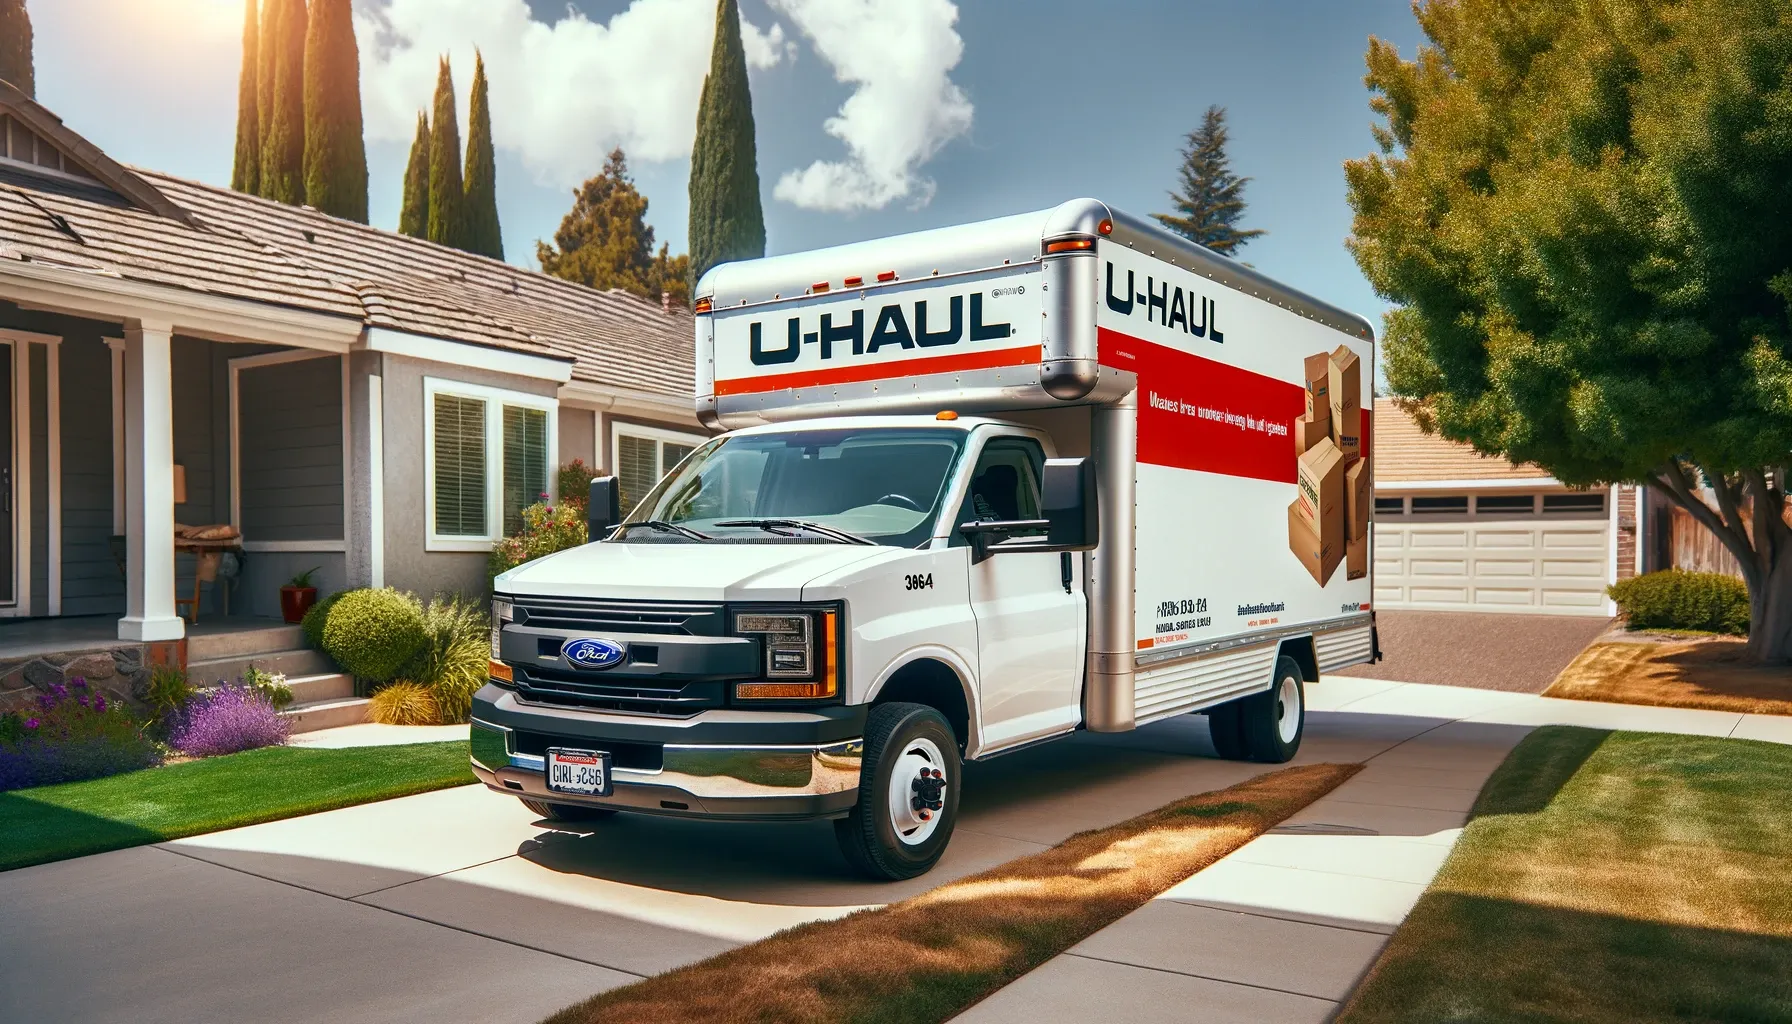 How to Secure a Uhaul Truck Overnight?